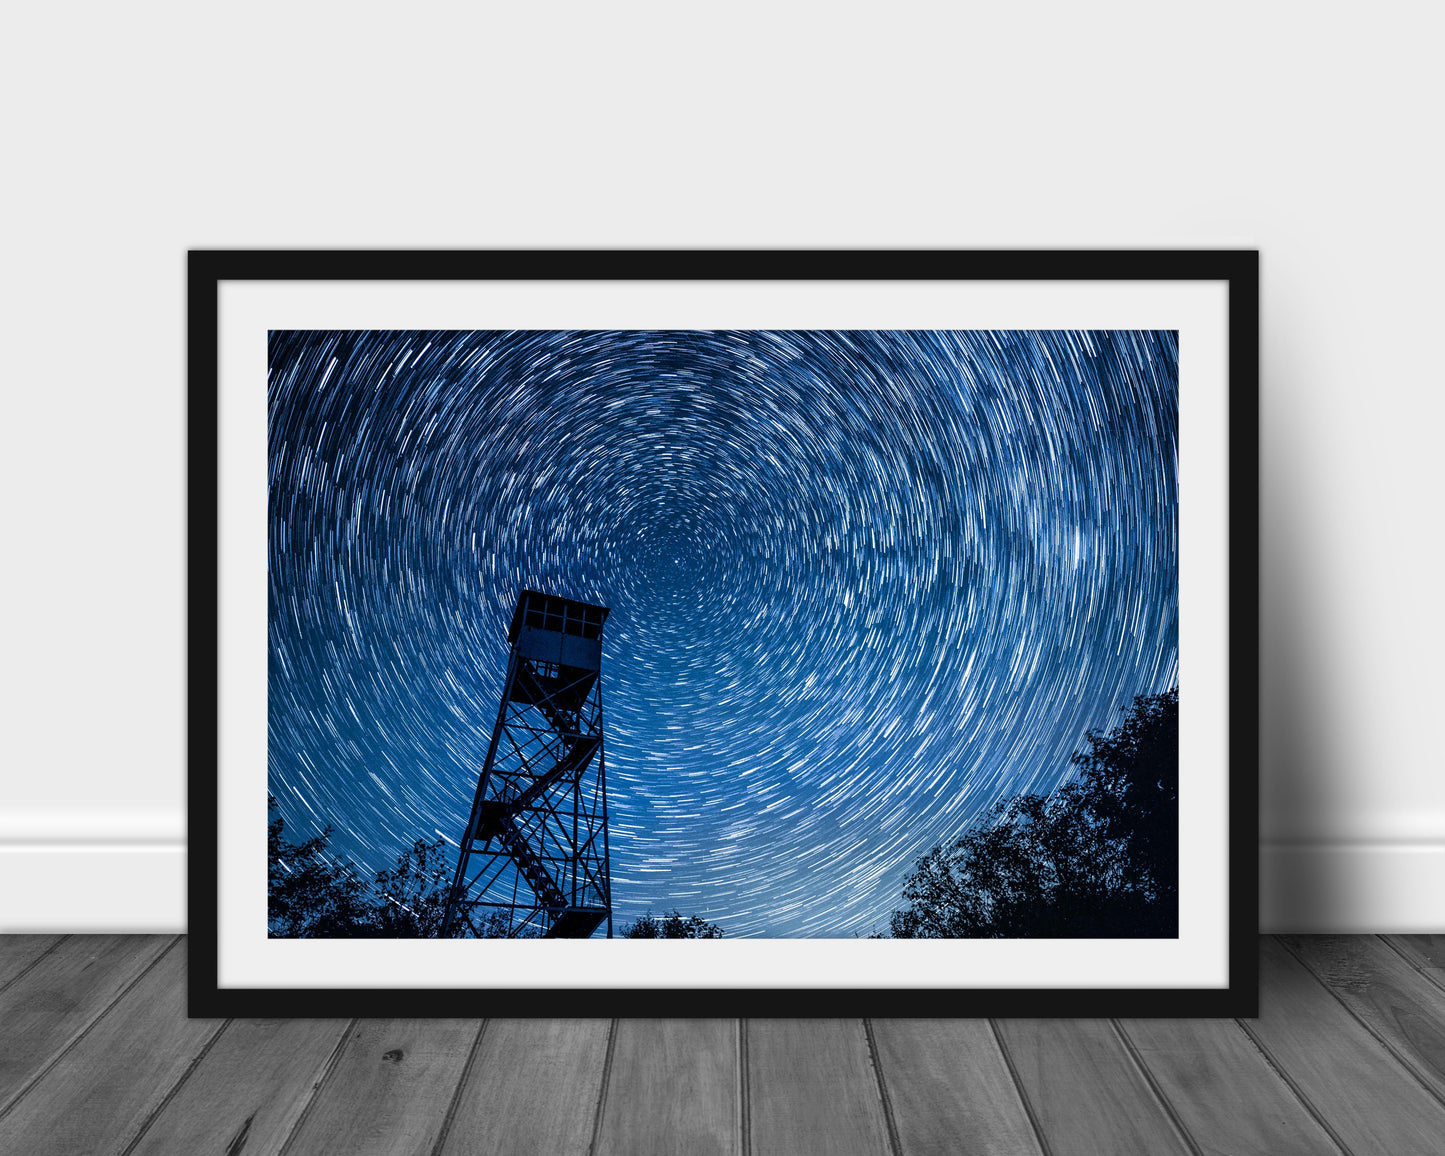 Azure Mountain Firetower: Night Sky Star Trails & Milky Way Nature Photography Prints - Adventure Print for Landscape Wall Art